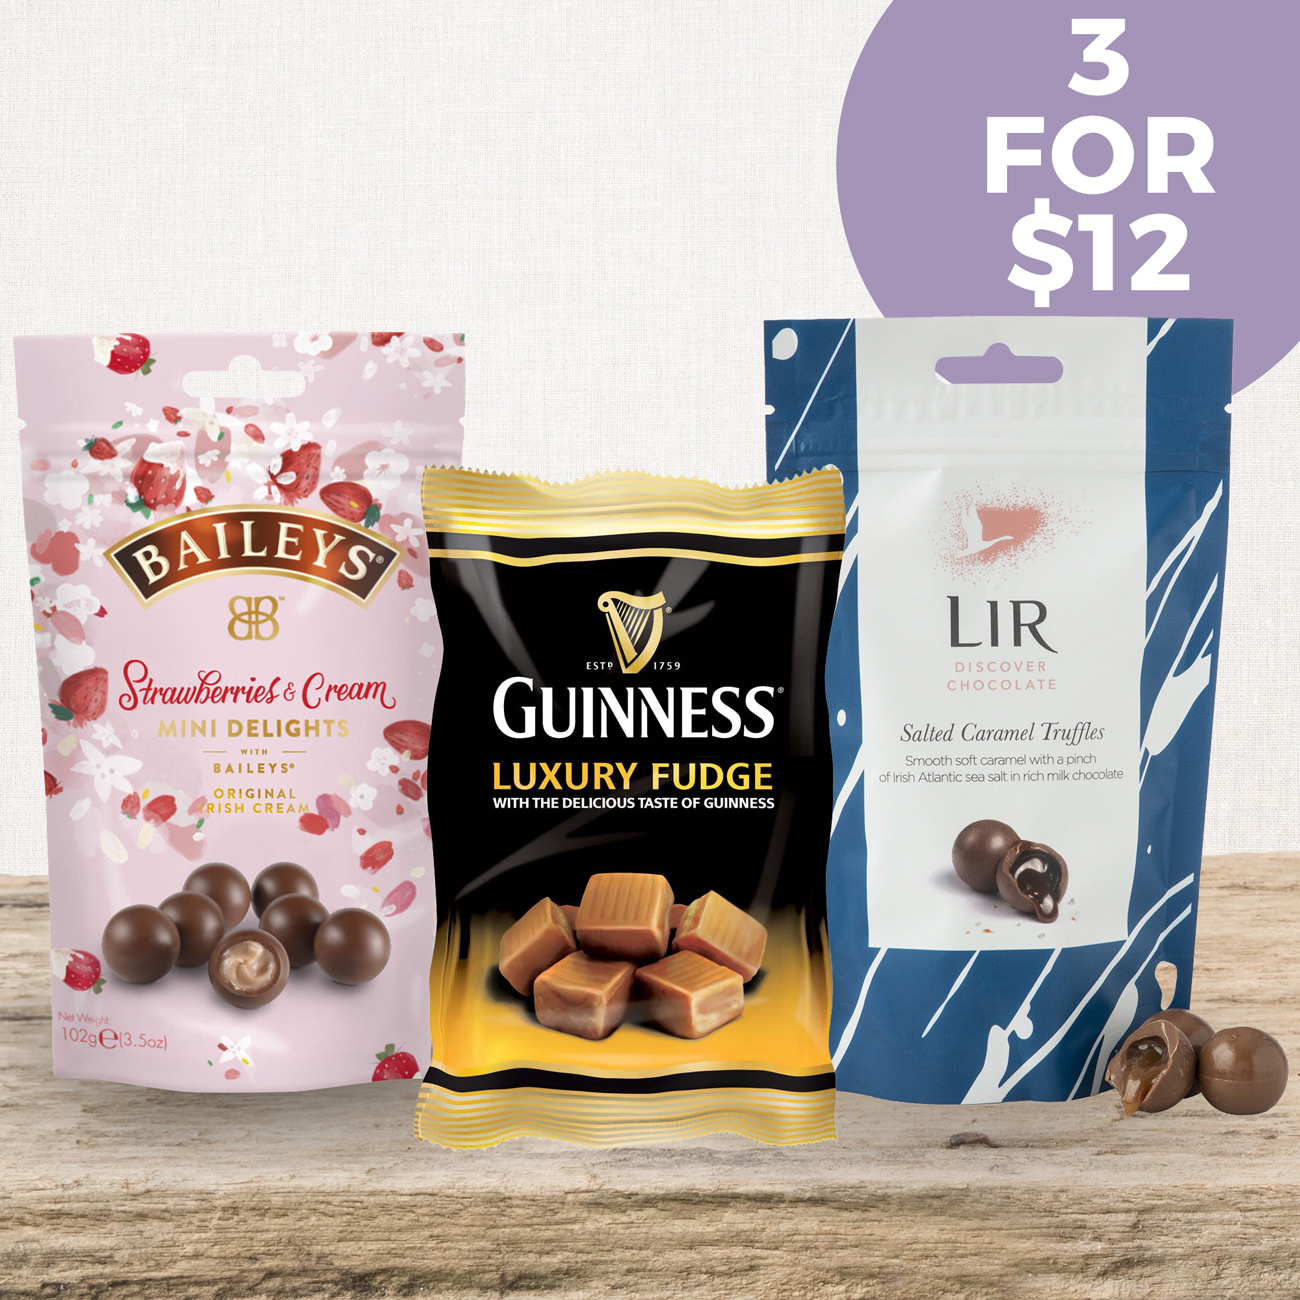 Mix and match on sweet treats with our great price offer on 3 products